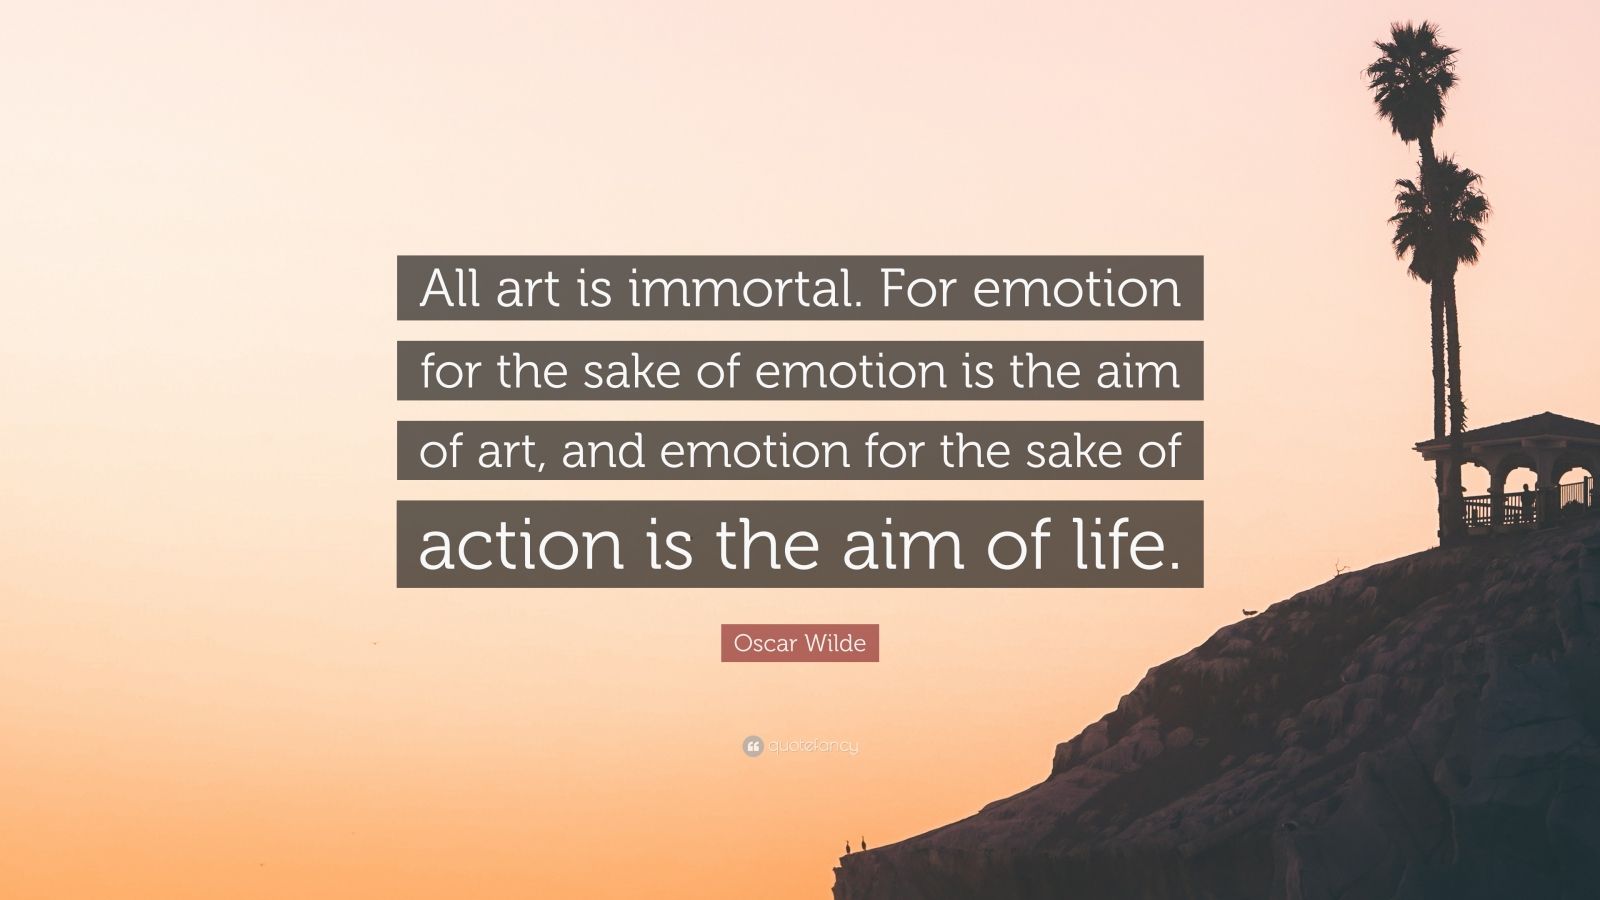 Oscar Wilde Quote “All art is immortal. For emotion for